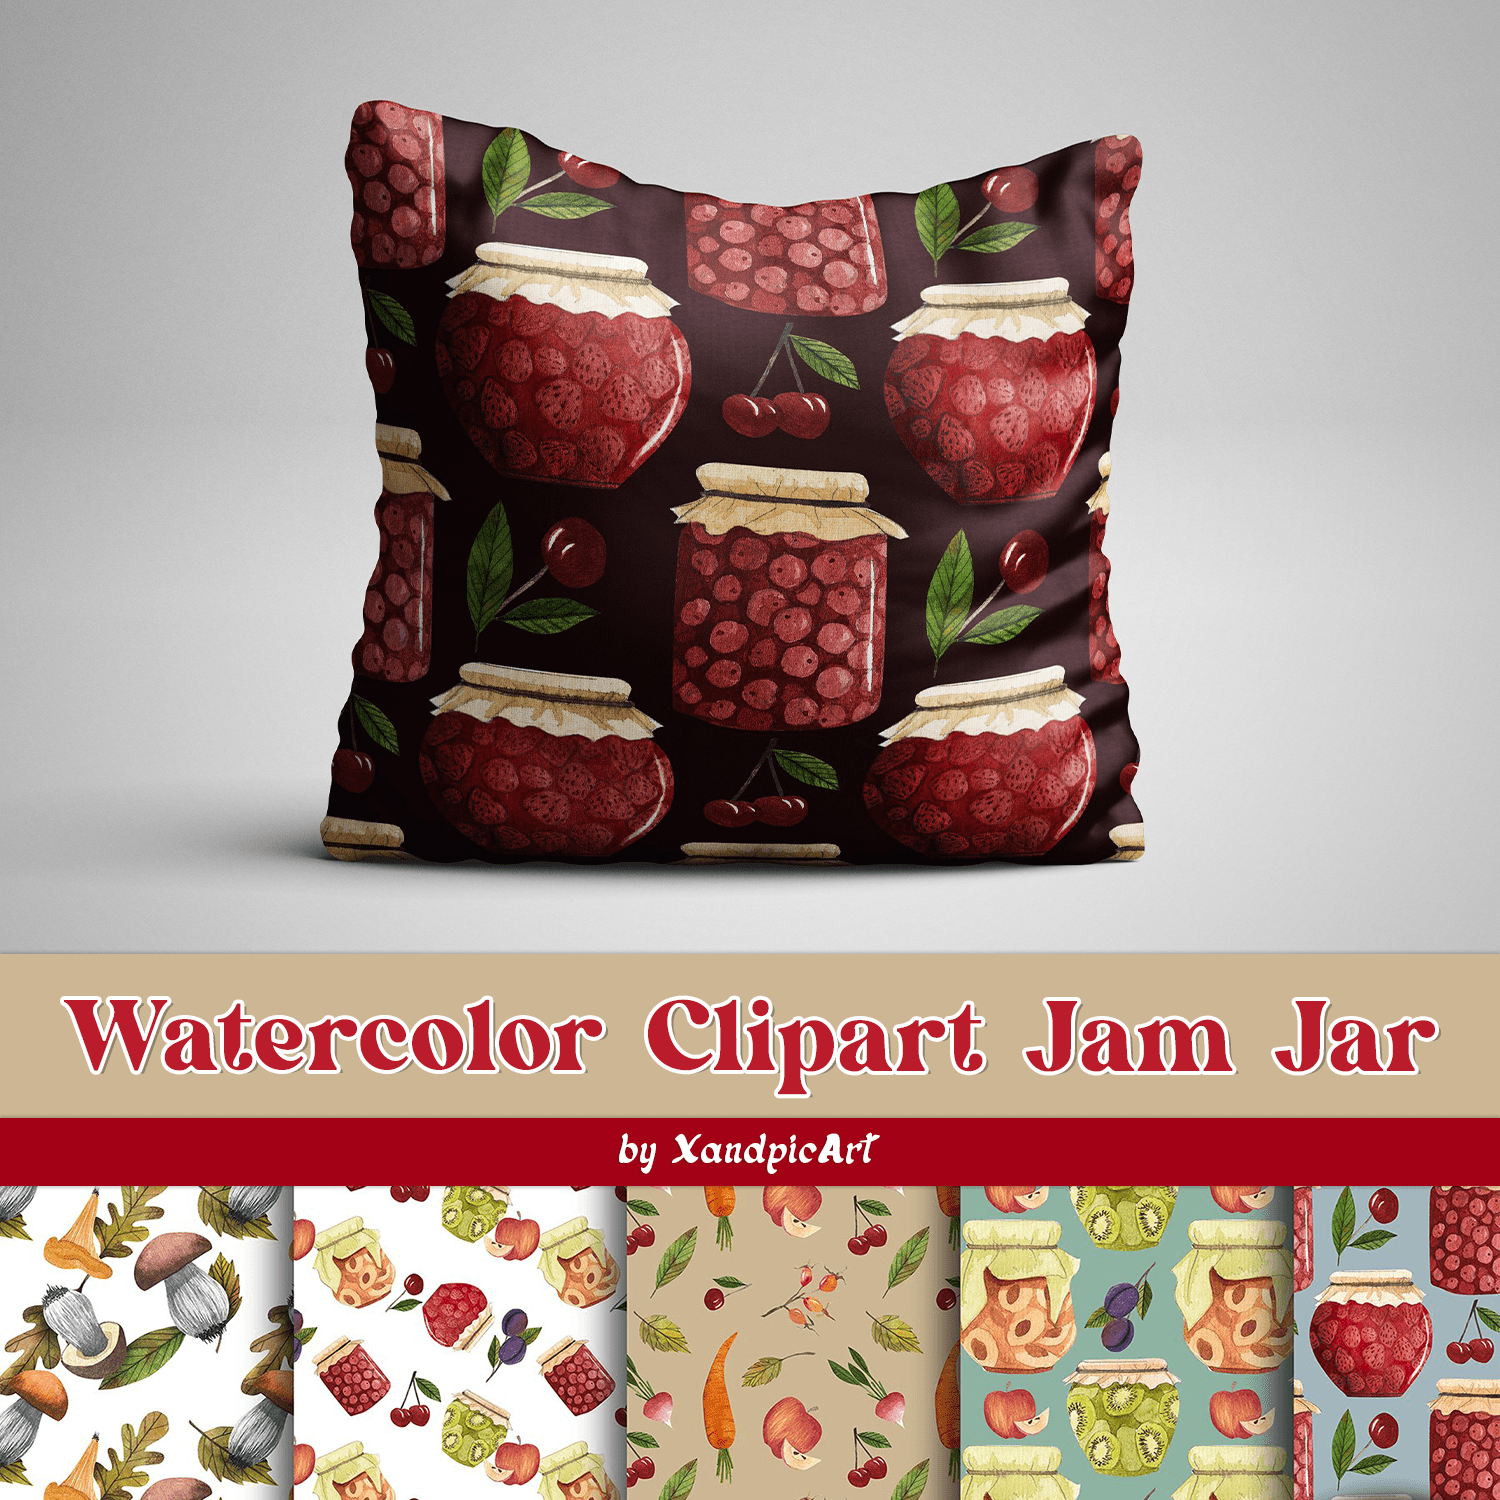 Watercolor Clipart Jam Jar Created By XandpicArt.